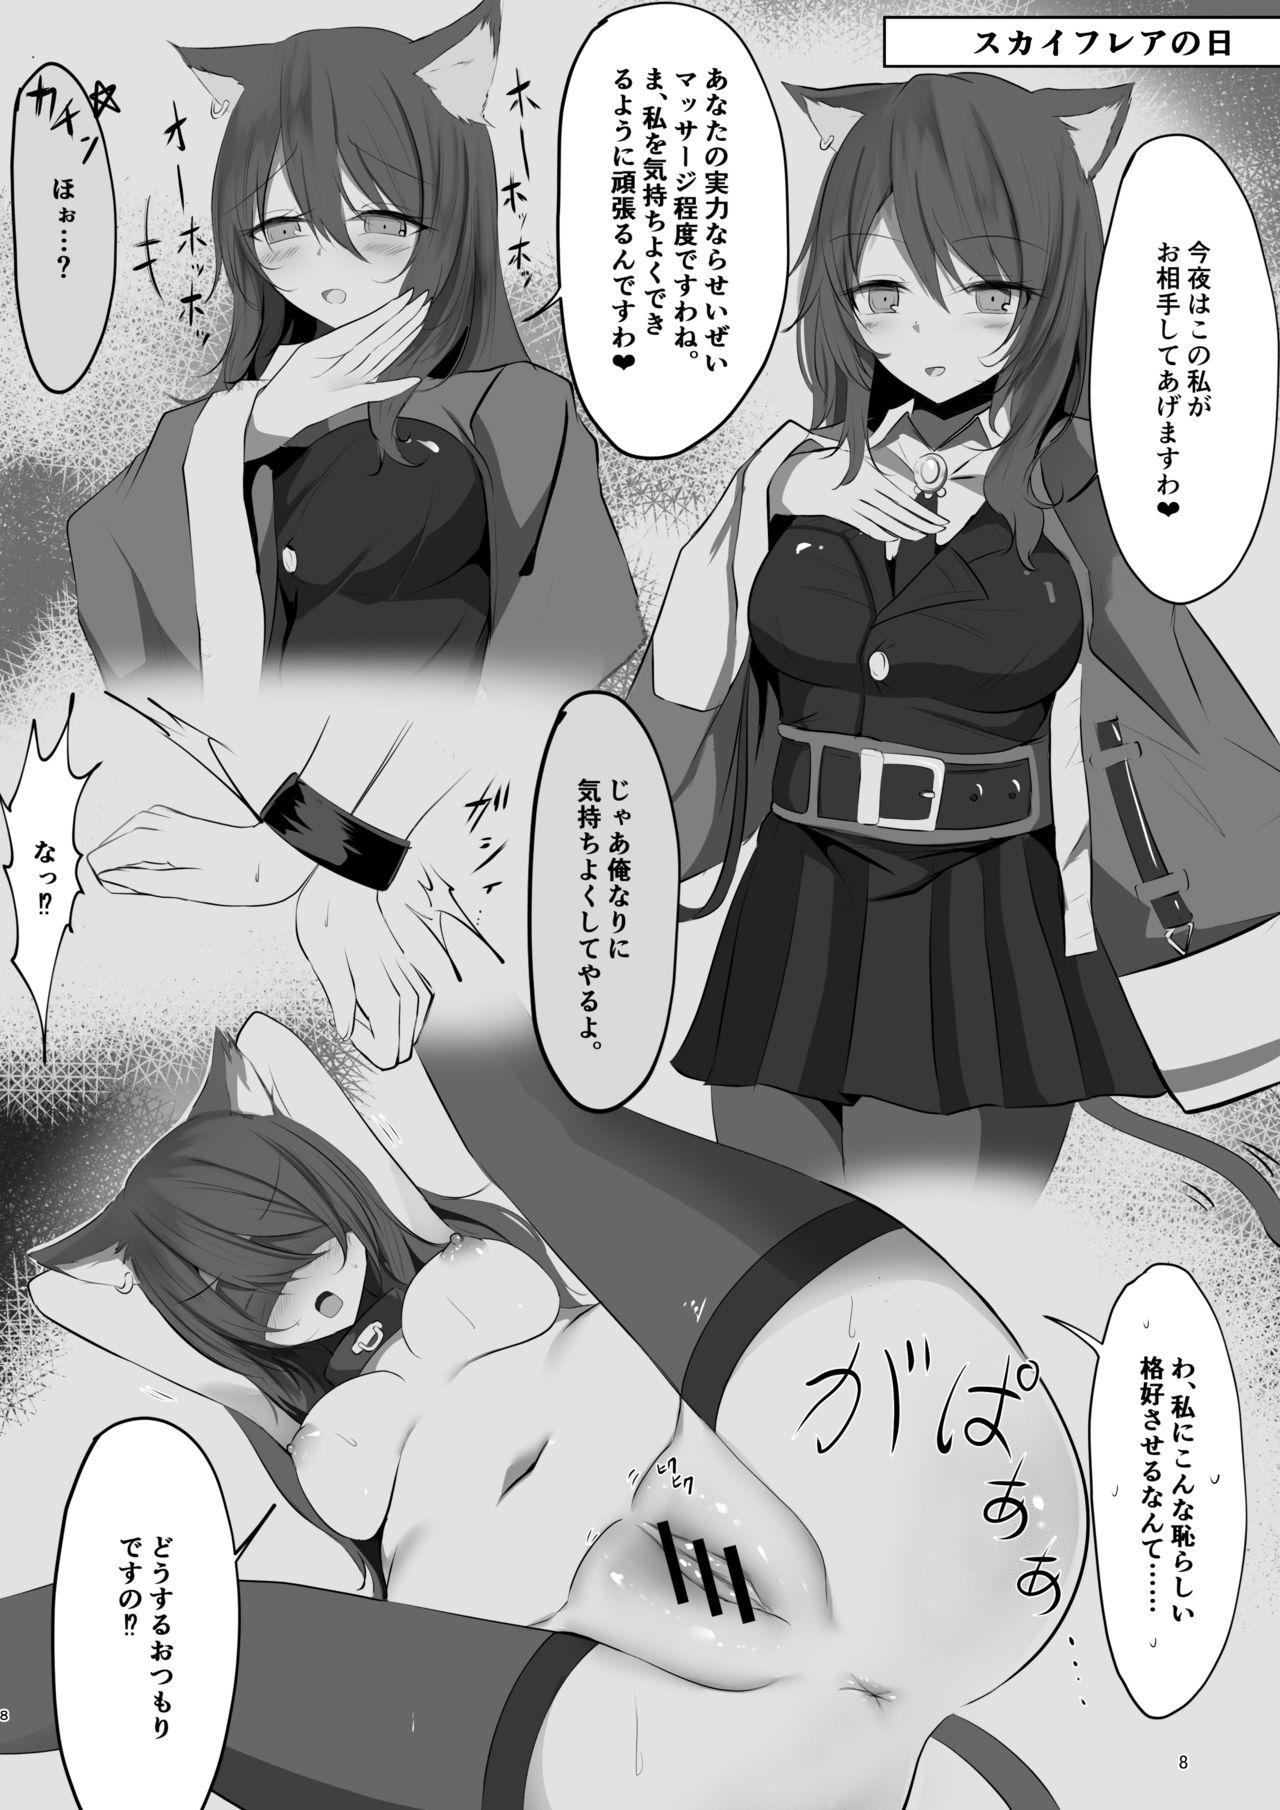 Chica 夜な夜な扇情作戦記録 - Arknights Famosa - Page 8